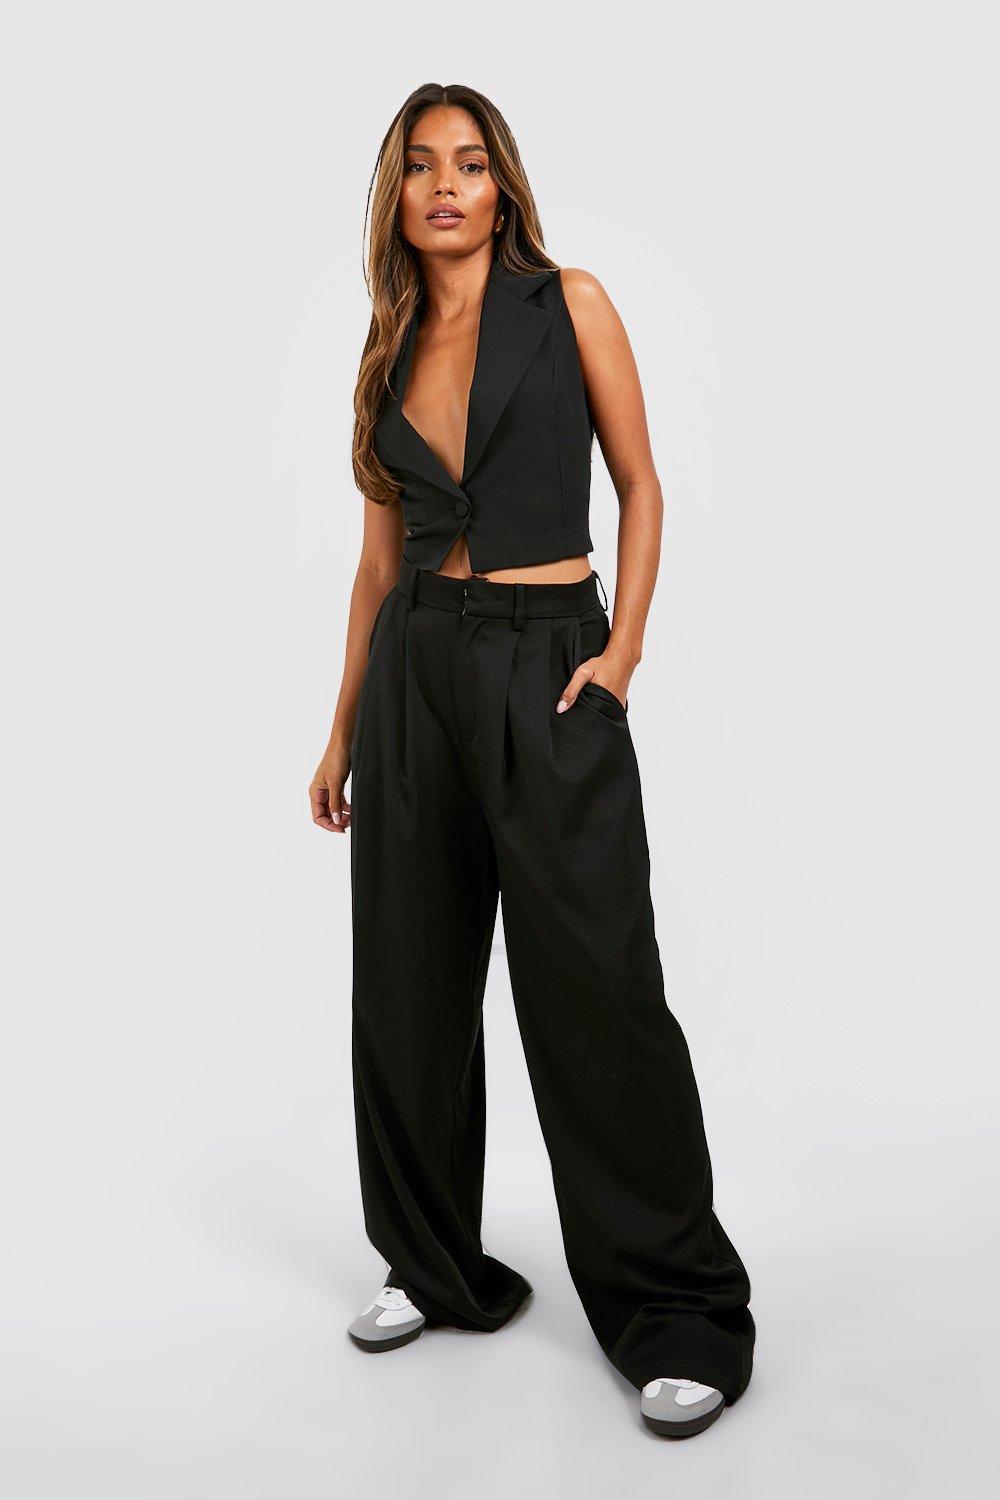 Boohoo Tailored Relaxed Fit Pleated Wide Leg Trousers in Black | Lyst UK